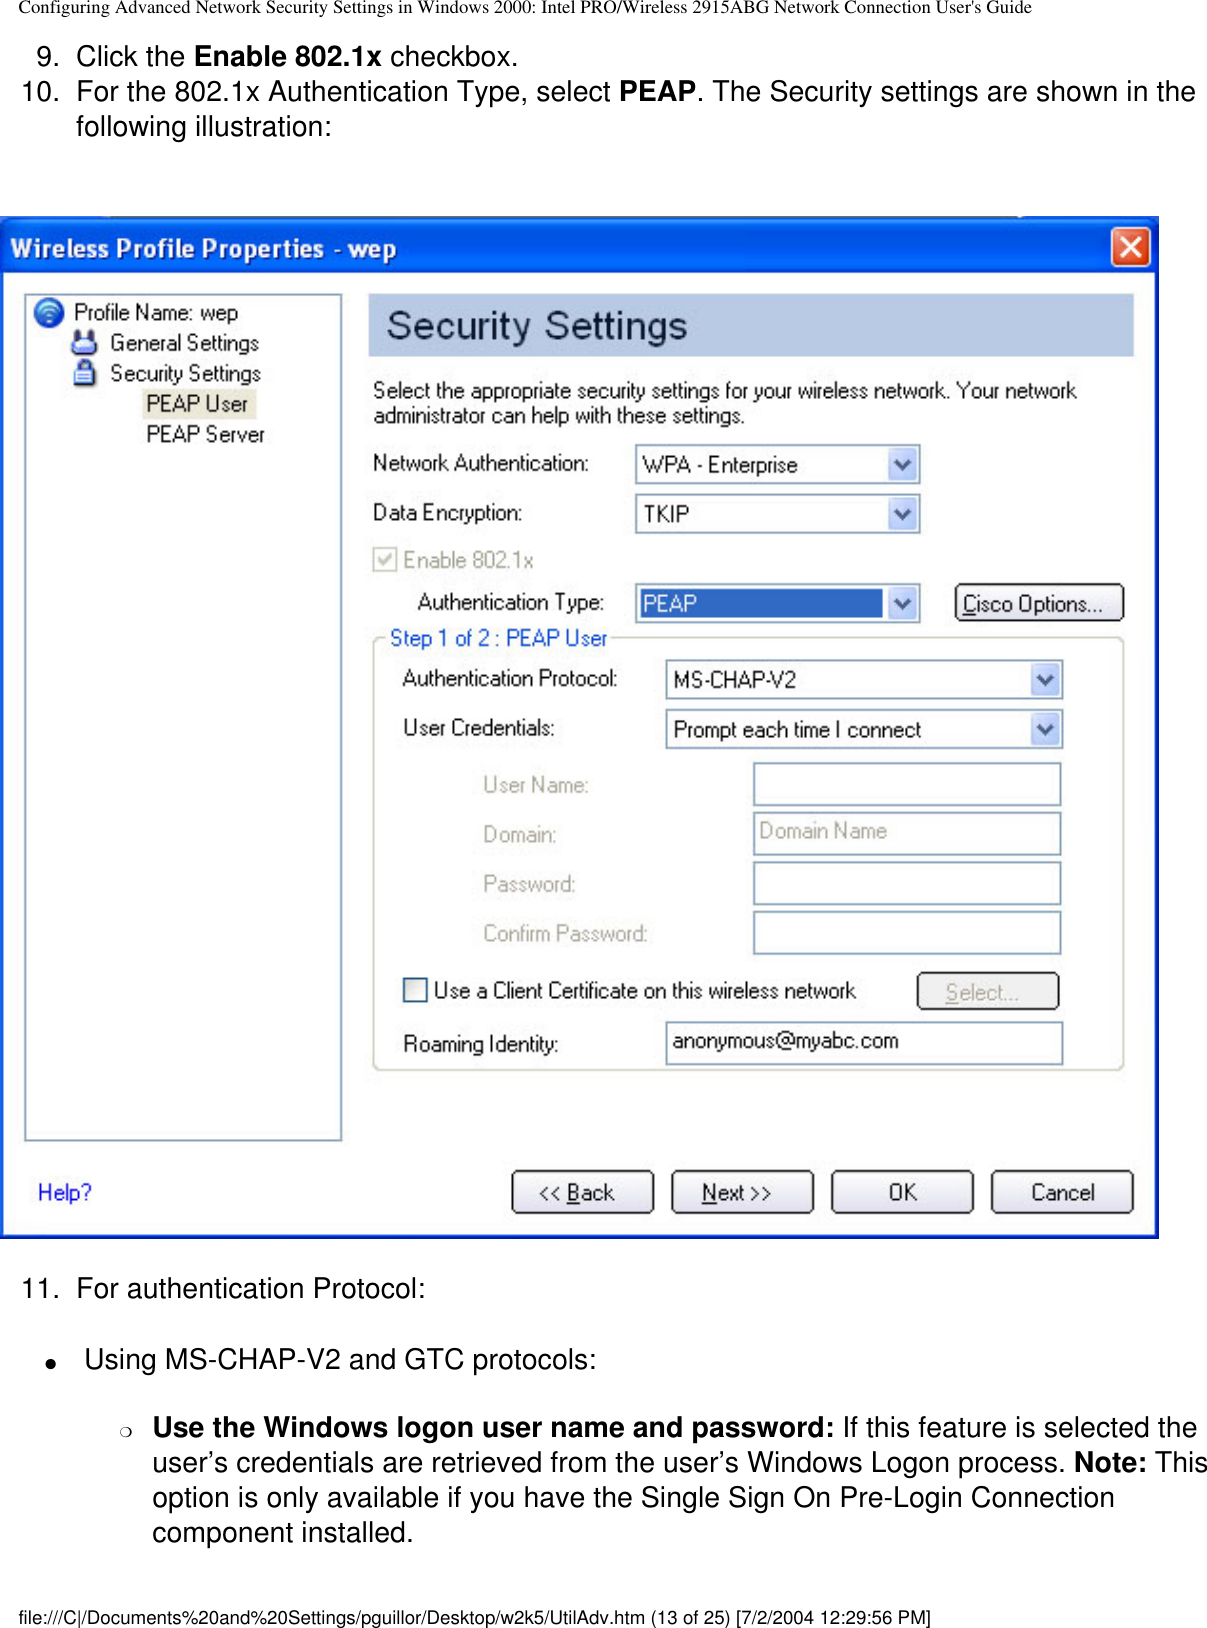 Configuring Advanced Network Security Settings in Windows 2000: Intel PRO/Wireless 2915ABG Network Connection User&apos;s Guide9.  Click the Enable 802.1x checkbox.10.  For the 802.1x Authentication Type, select PEAP. The Security settings are shown in the following illustration:           11.  For authentication Protocol:●      Using MS-CHAP-V2 and GTC protocols: ❍     Use the Windows logon user name and password: If this feature is selected the user’s credentials are retrieved from the user’s Windows Logon process. Note: This option is only available if you have the Single Sign On Pre-Login Connection component installed.file:///C|/Documents%20and%20Settings/pguillor/Desktop/w2k5/UtilAdv.htm (13 of 25) [7/2/2004 12:29:56 PM]